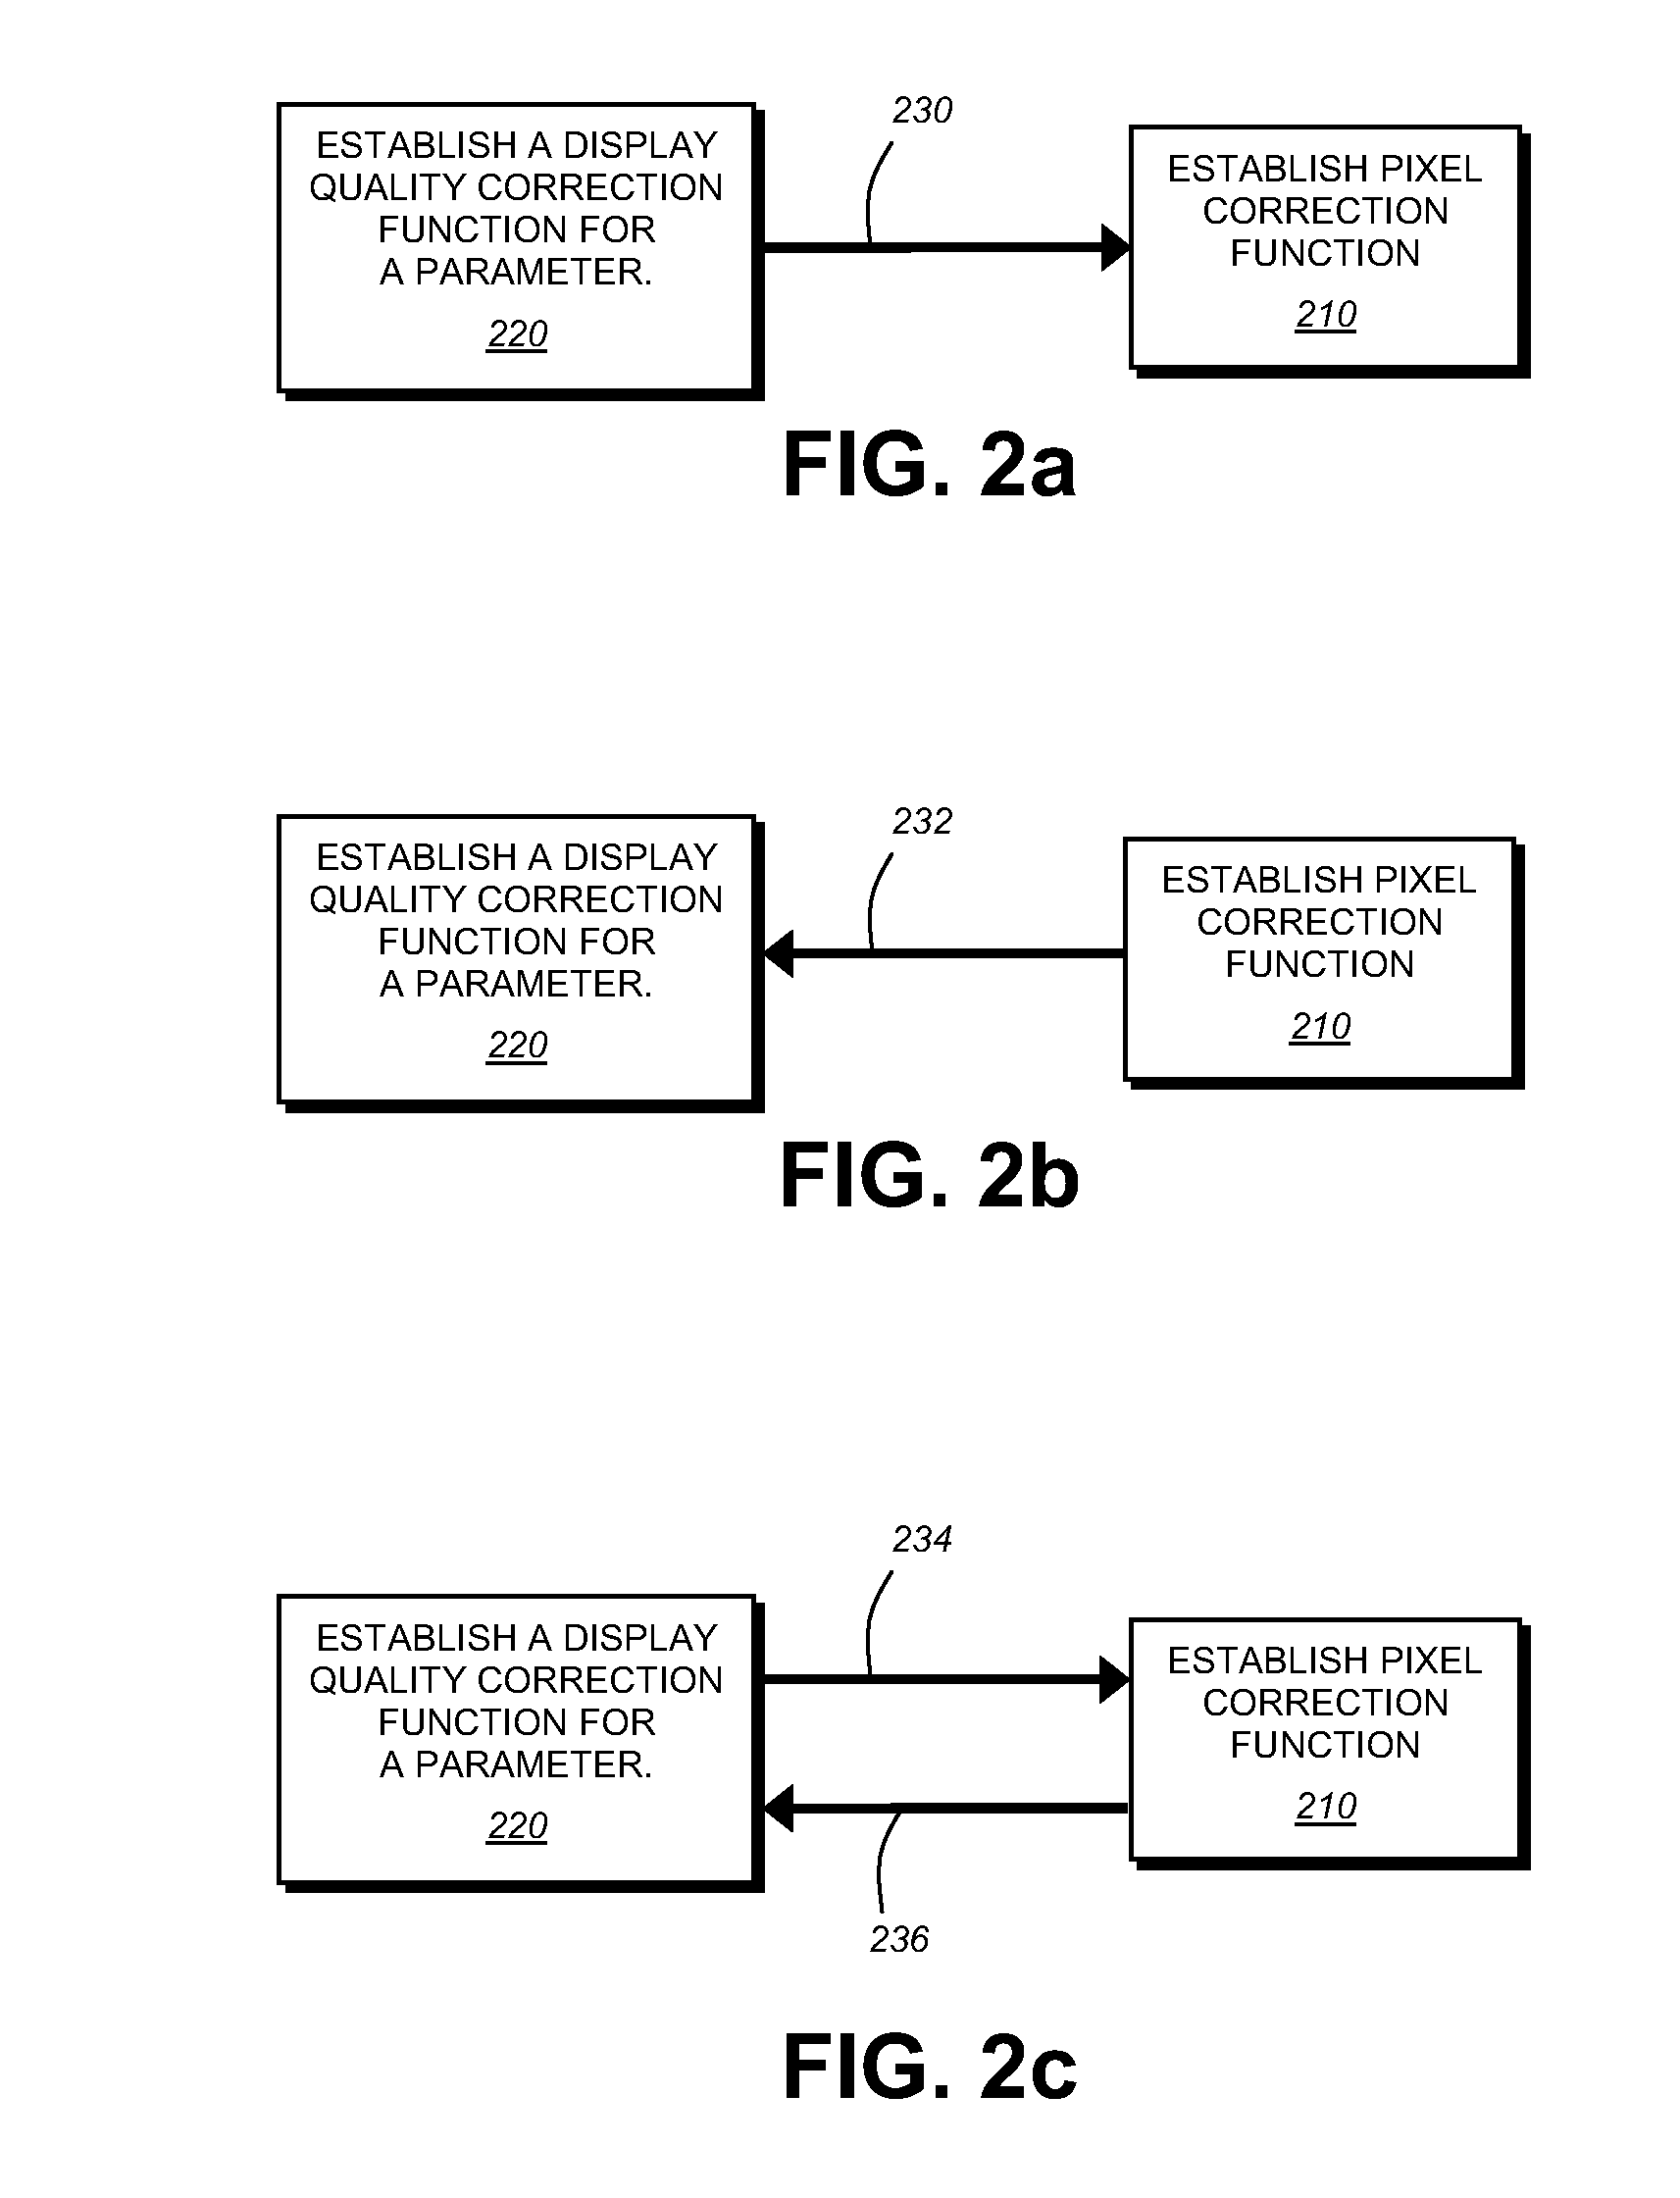 System and method for providing improved display quality by display adjustment and image processing using optical feedback